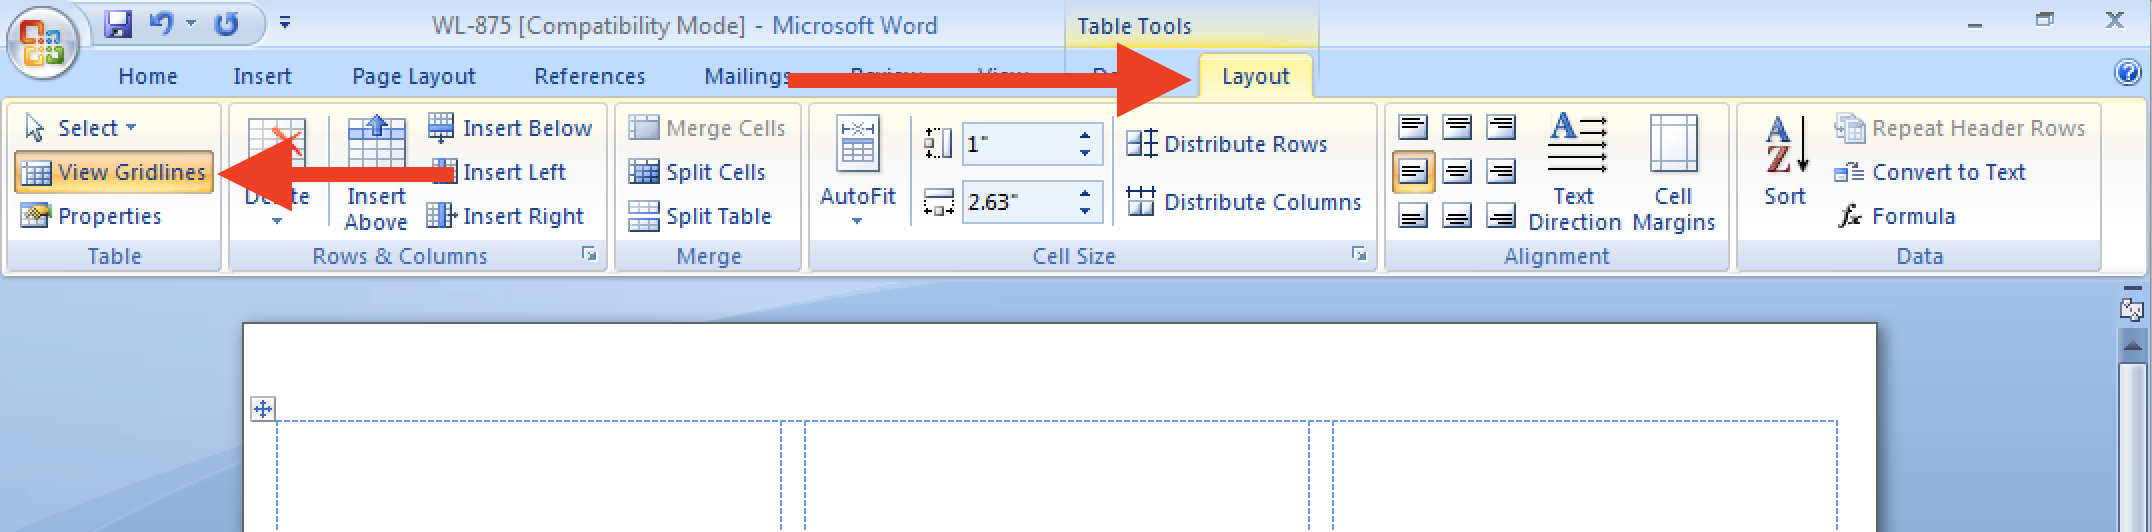 Insert And Resize Images/text Into Label Cells In A Word Regarding How To Insert Template In Word